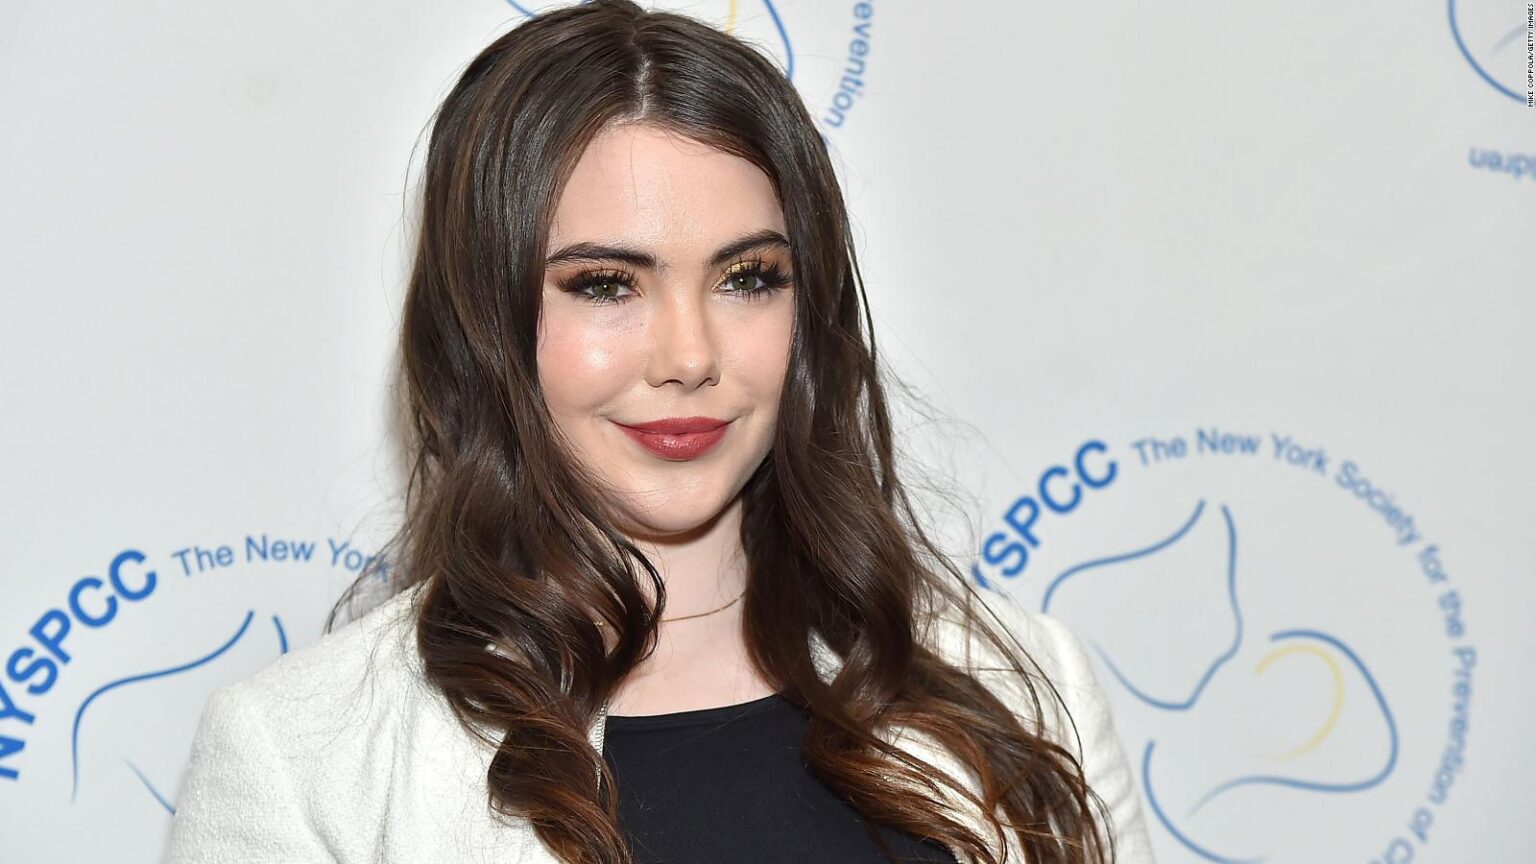 Mckayla Maroney Plastic Surgery With Before And After Photos.